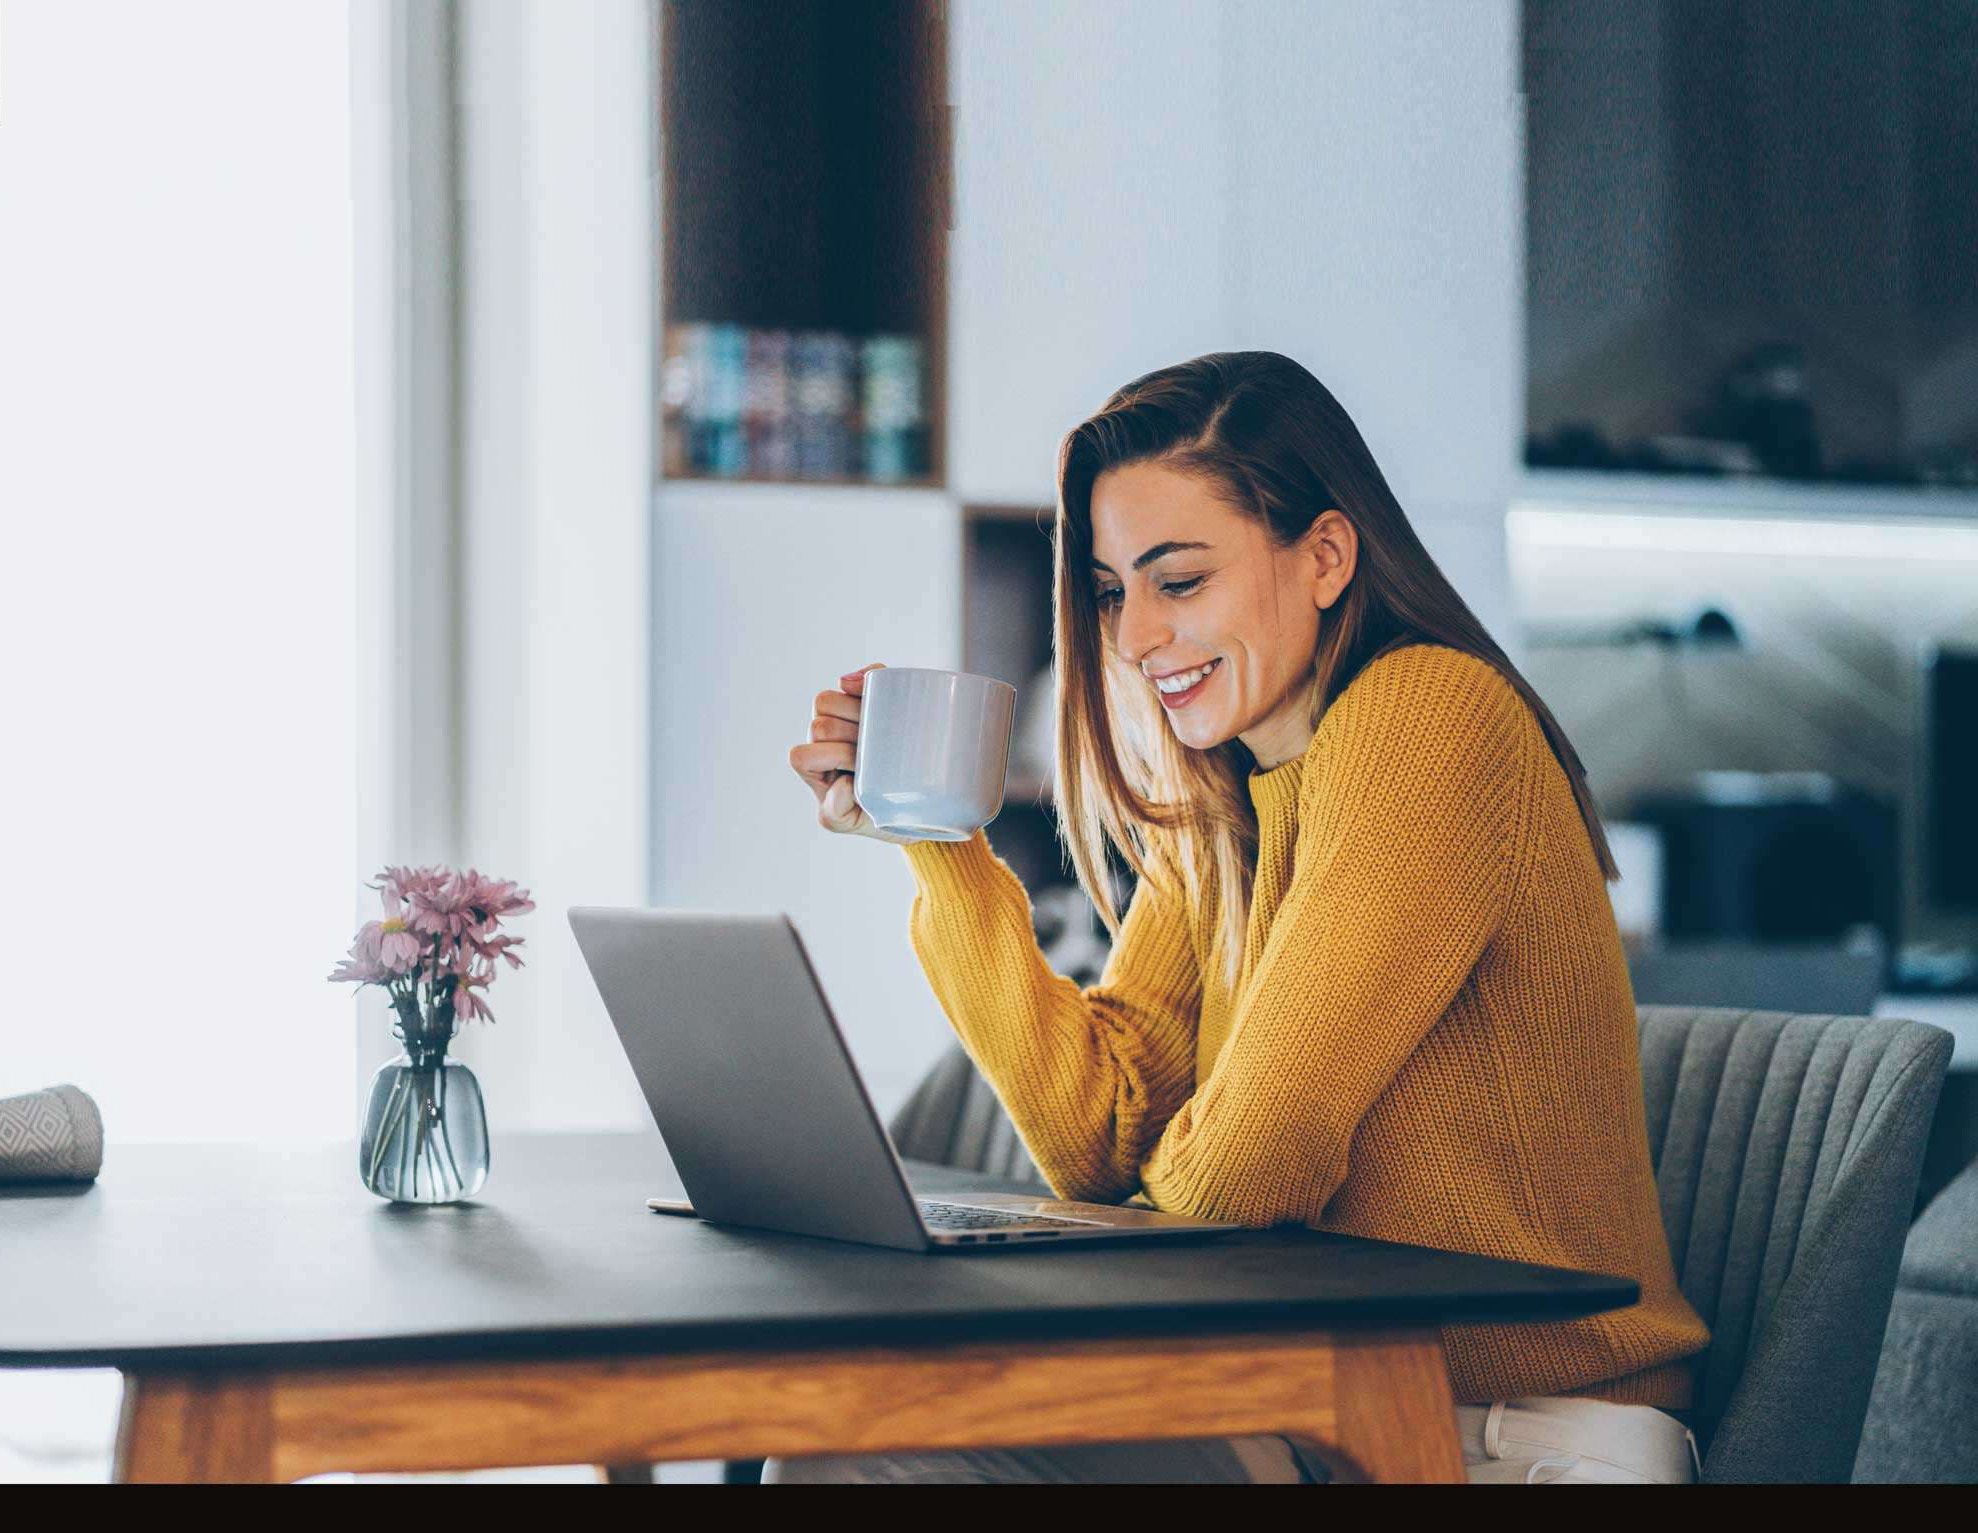 Woman sitting behind computer smiling with a mug